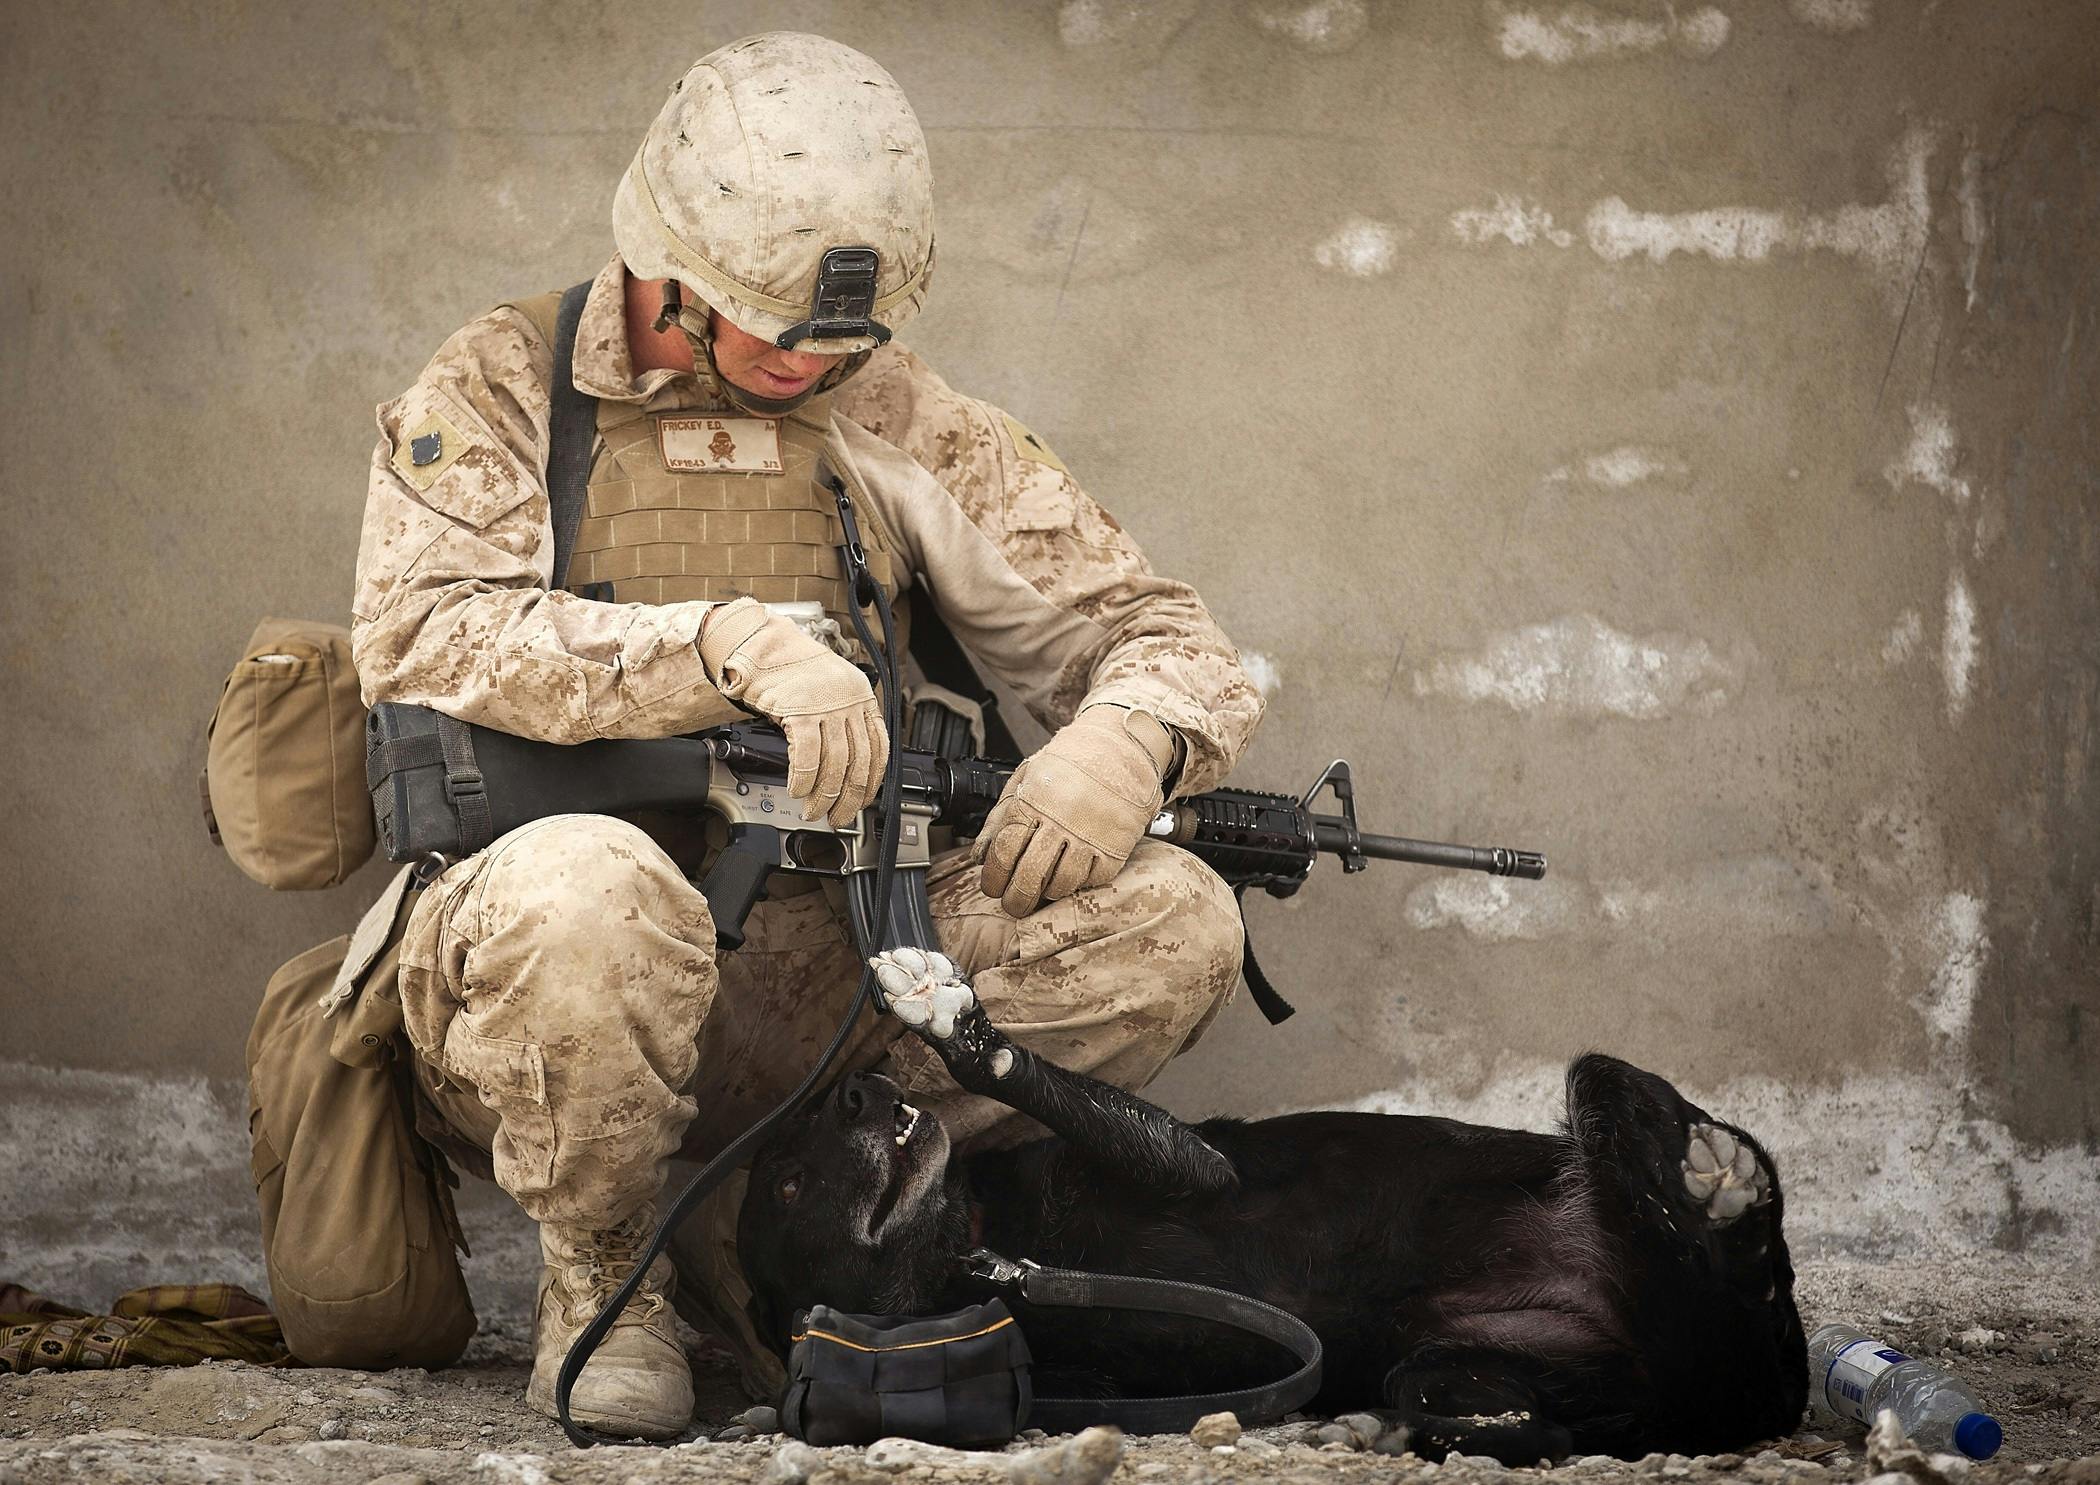 a soldier kneeling down next to a cow, a portrait, shutterstock, subject: dog, game ready, black, marine